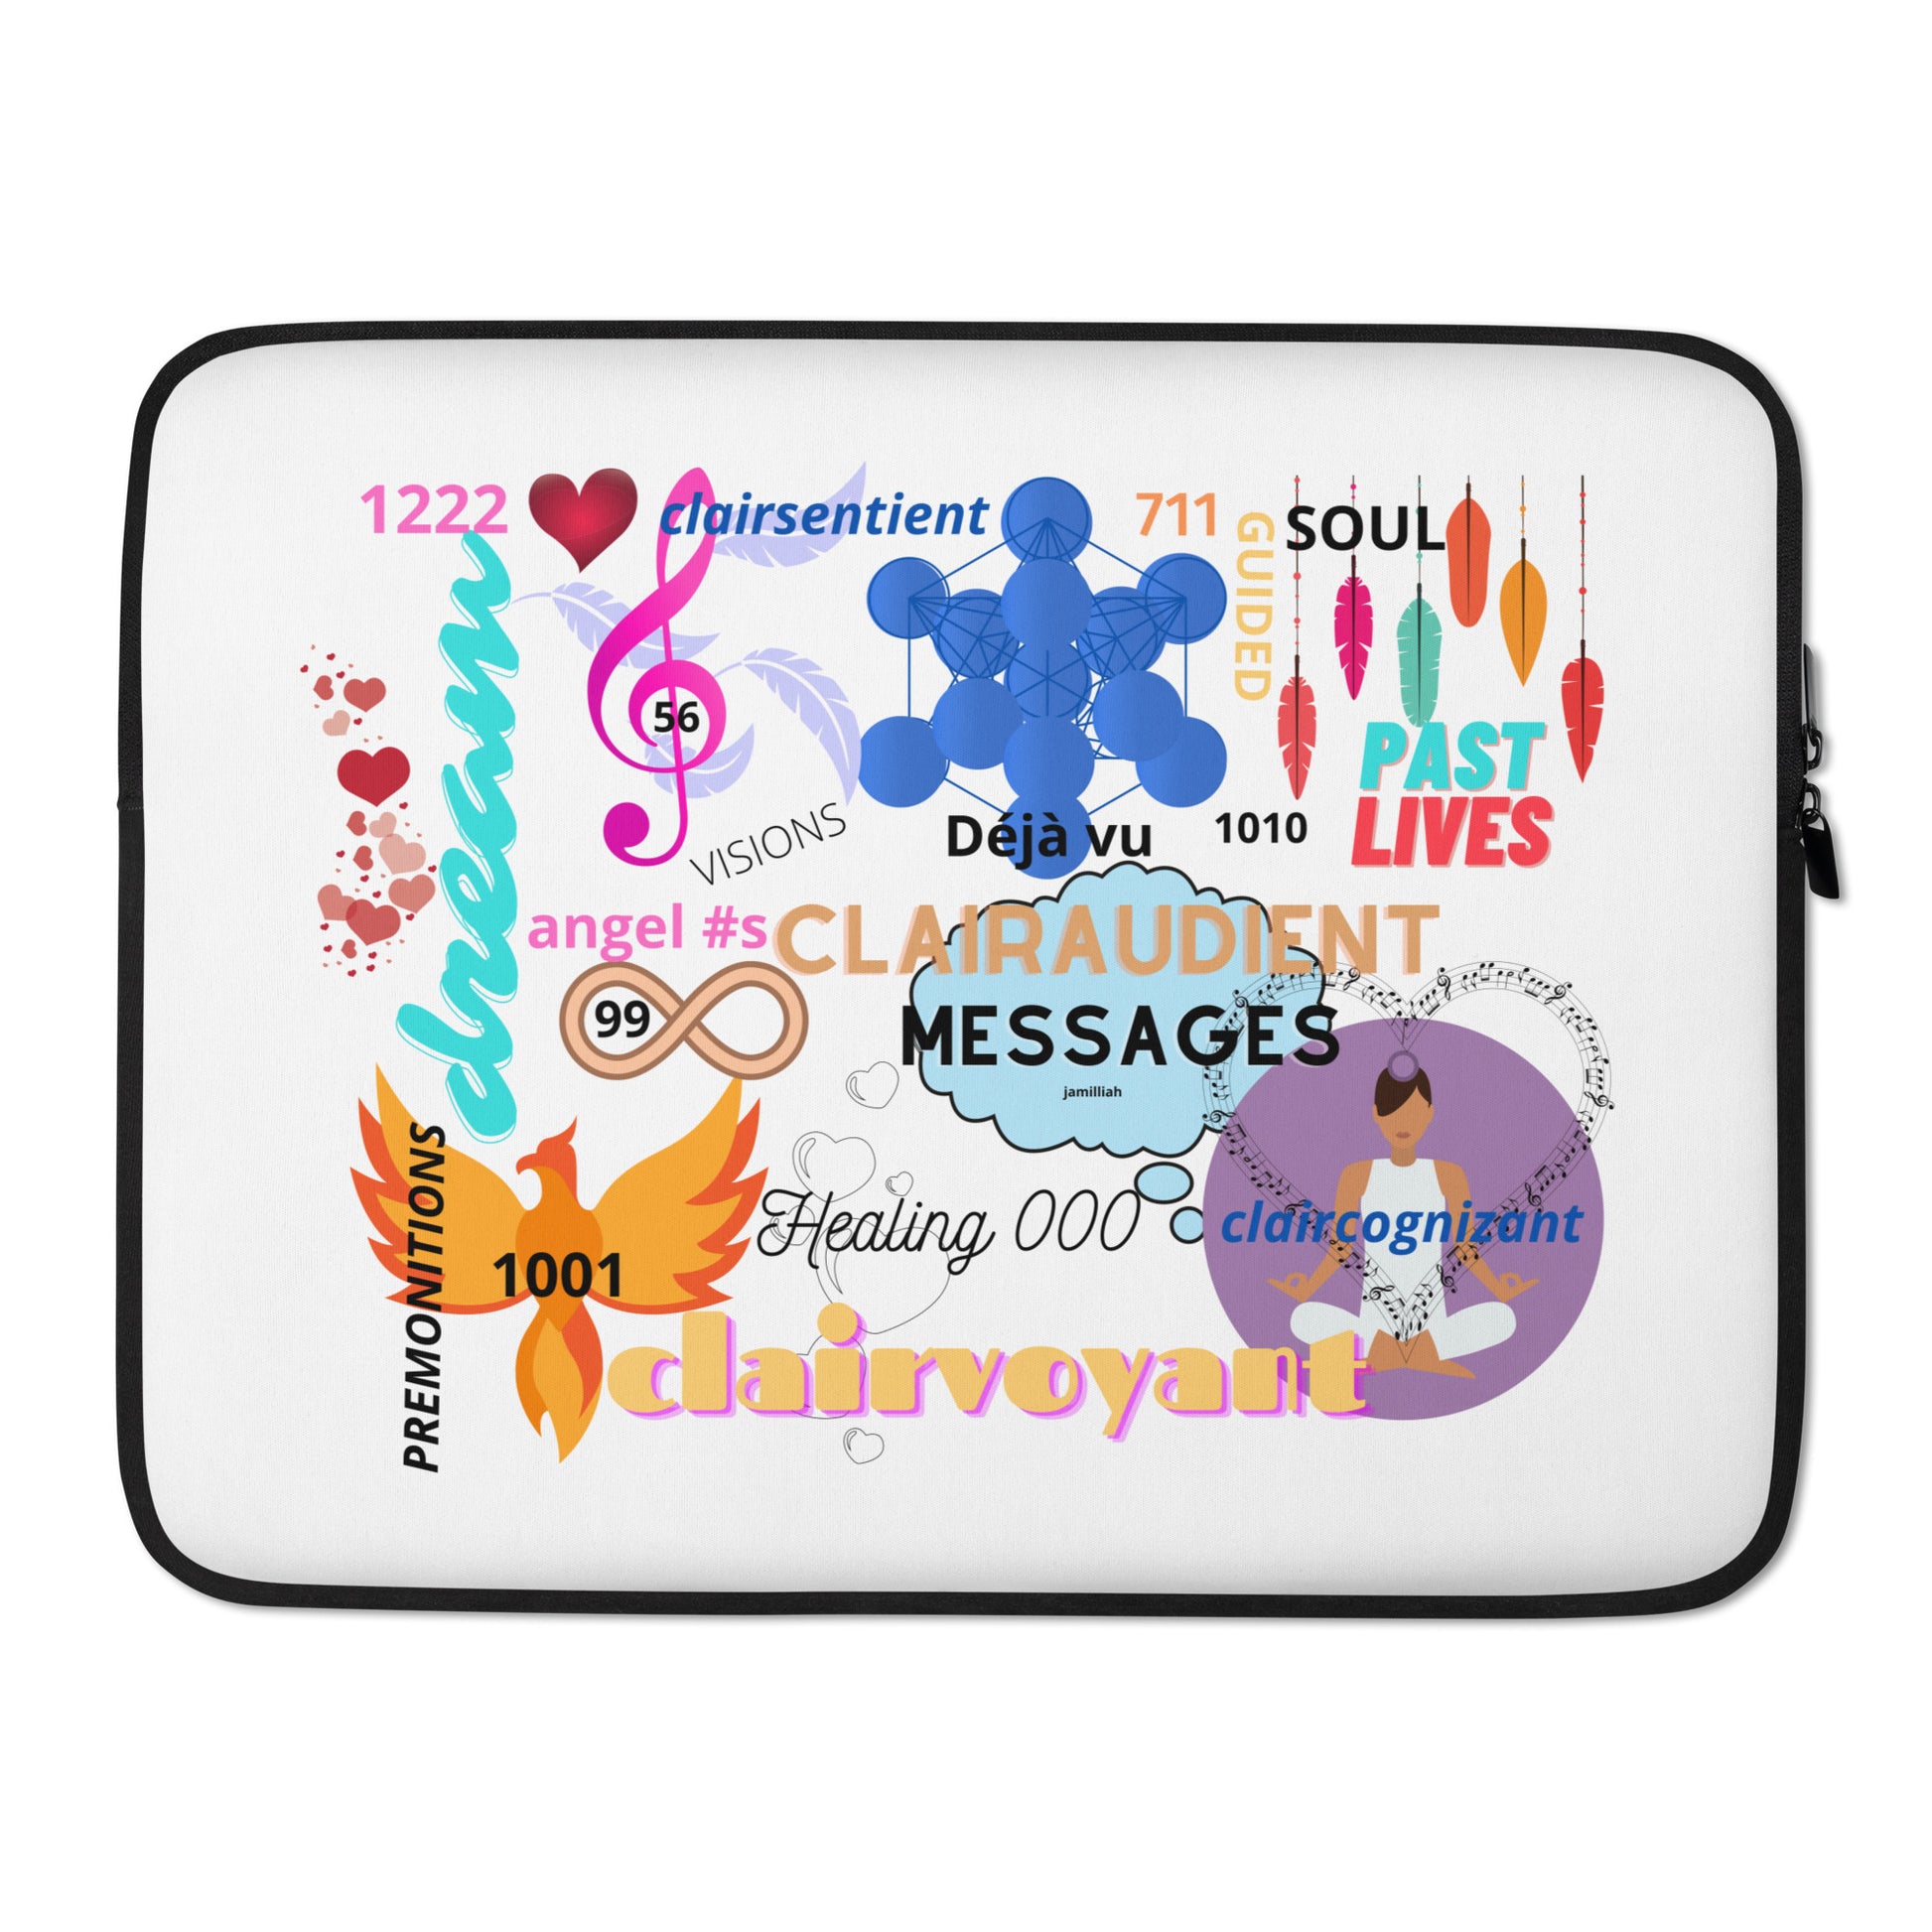 Laptop sleeve, 15 inches. White w/colorful spiritual collage/psychic aesthetic. Words: premonitions, dream, angel #s, visions, clairsentient, déjà vu, clairaudient, messages, healing, clairvoyant, claircognizant, guided, soul, past lives. Infinity sign, phoenix bird, music notes, feathers, hearts, thought cloud, sacred geometry circles (The Fruit of Life), and person in meditation w/purple crown chakra. Angel numbers 1222/56/99/1001/000/1010/711. JAMILLIAH'S WISDOM IS TIMELESS SHOP - wisdomistimeless.com.